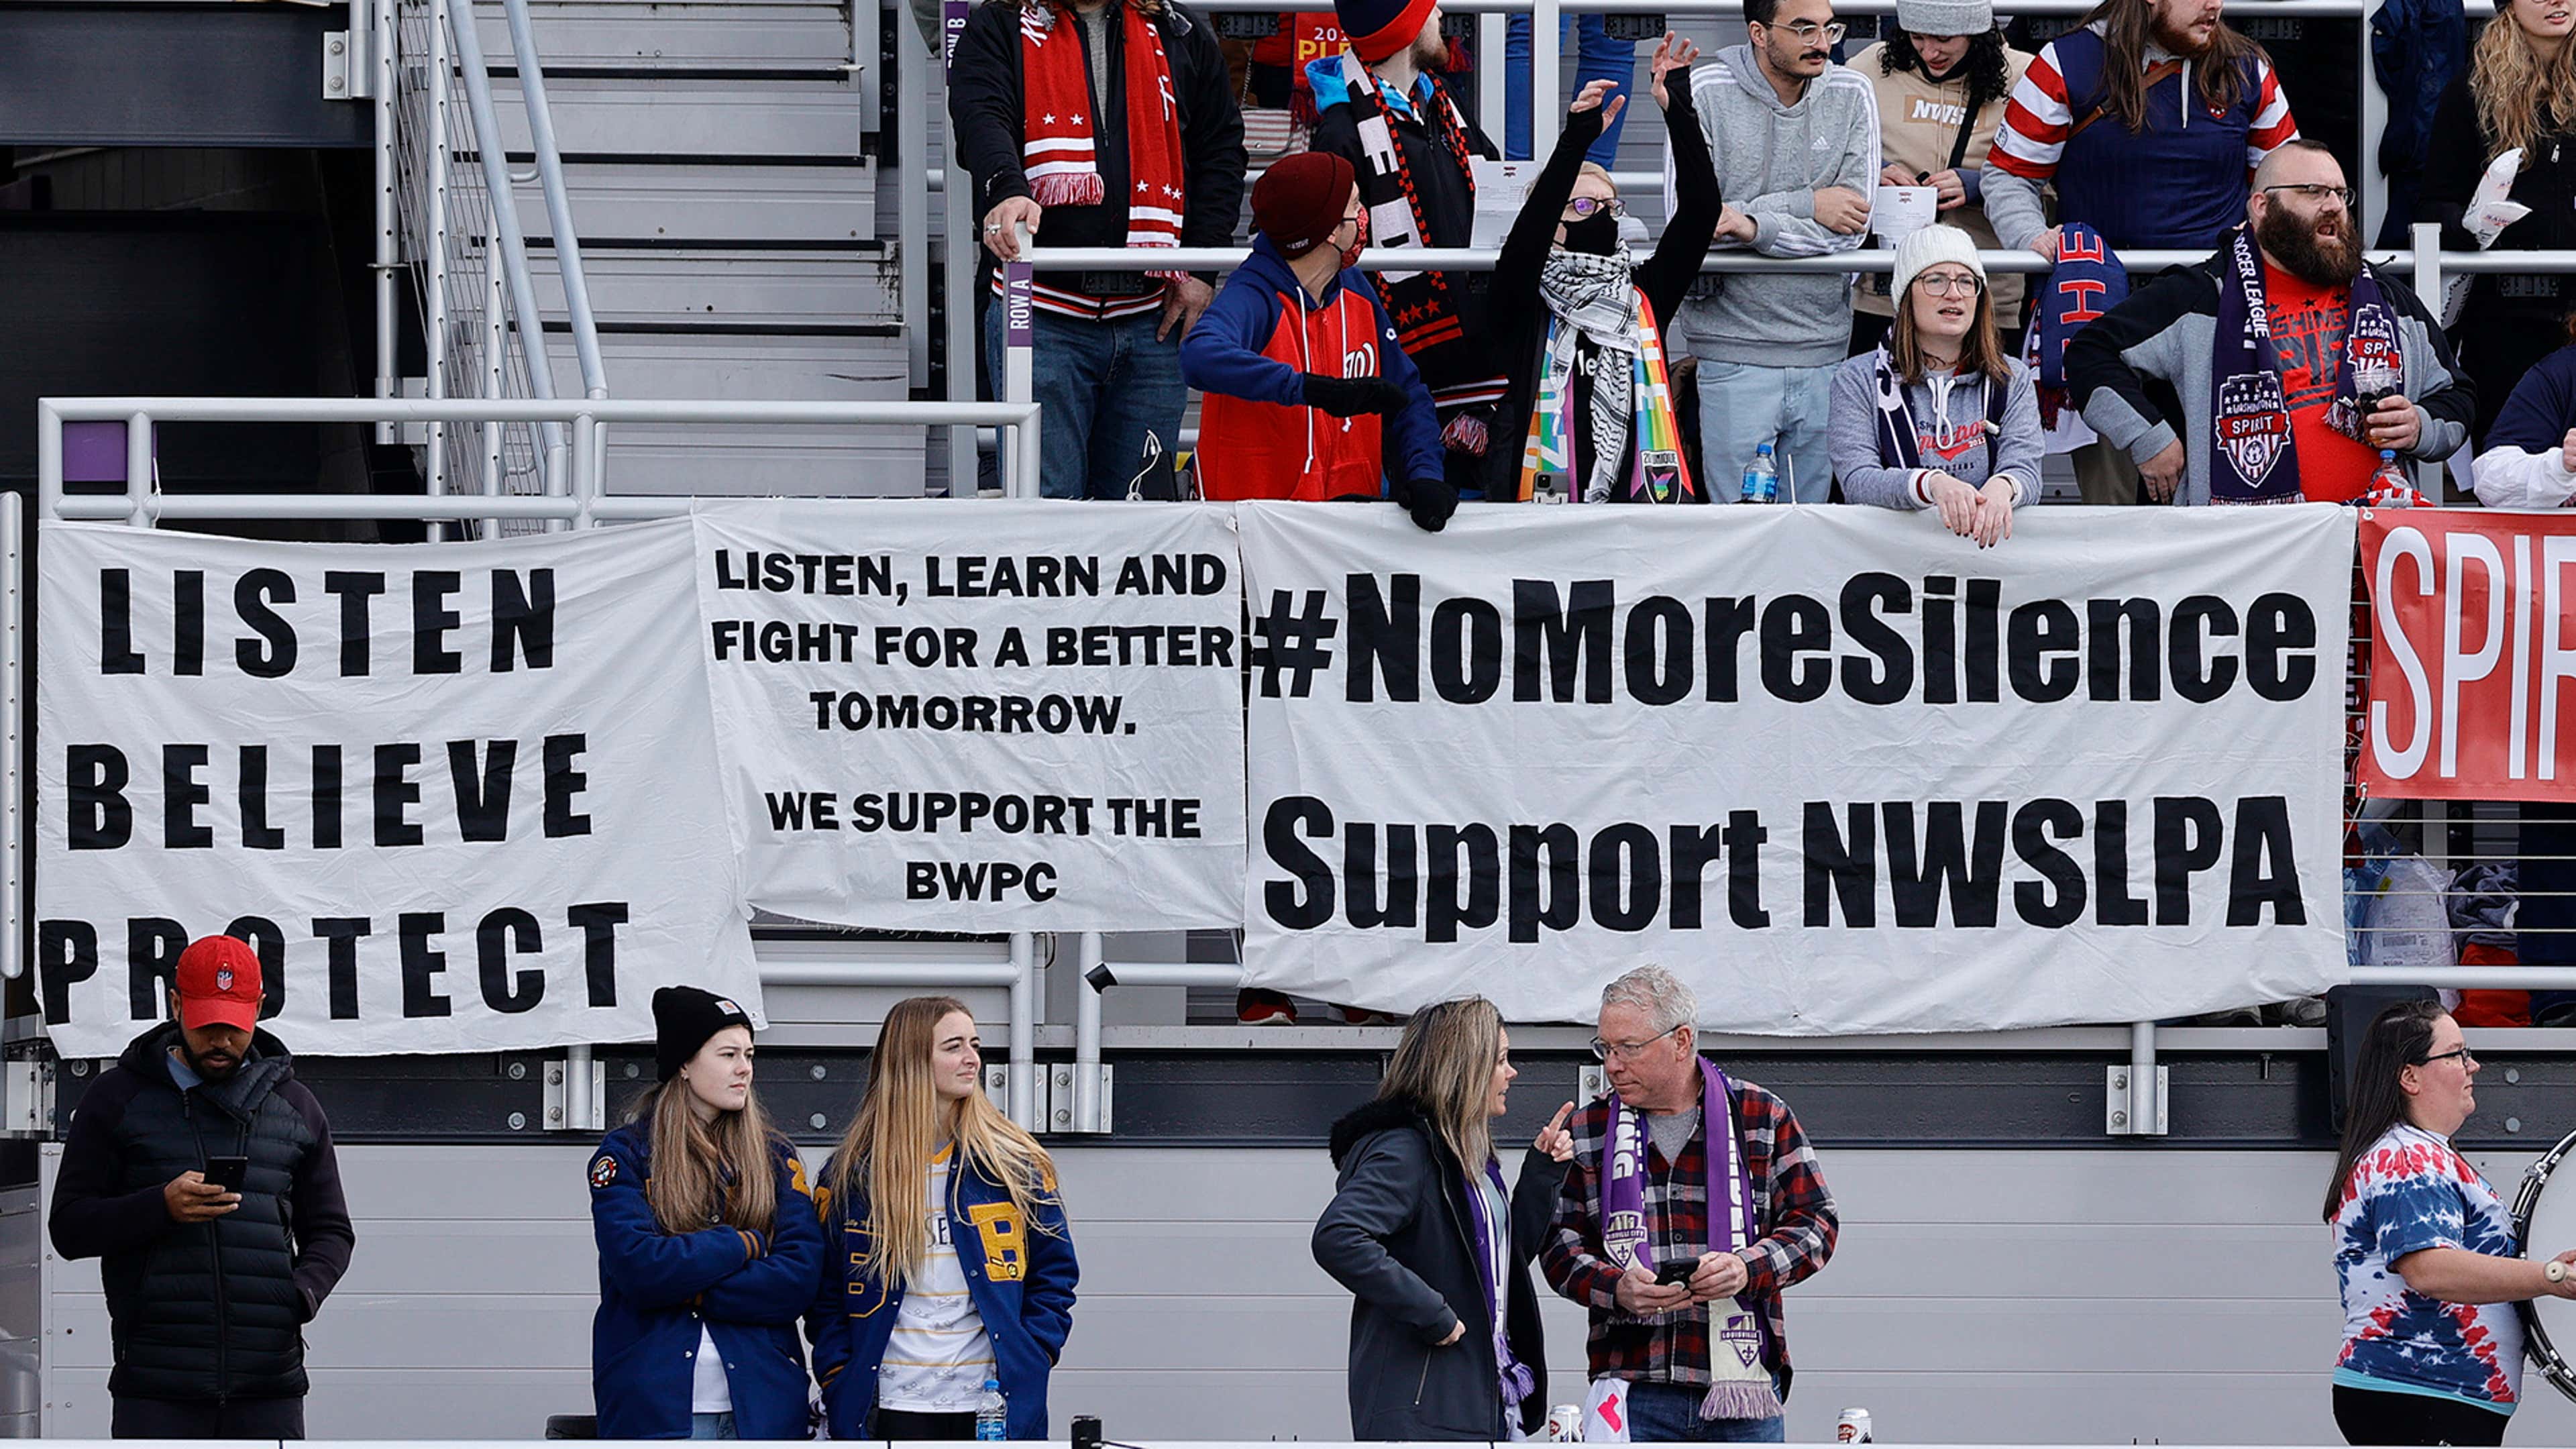 NWSL support banners